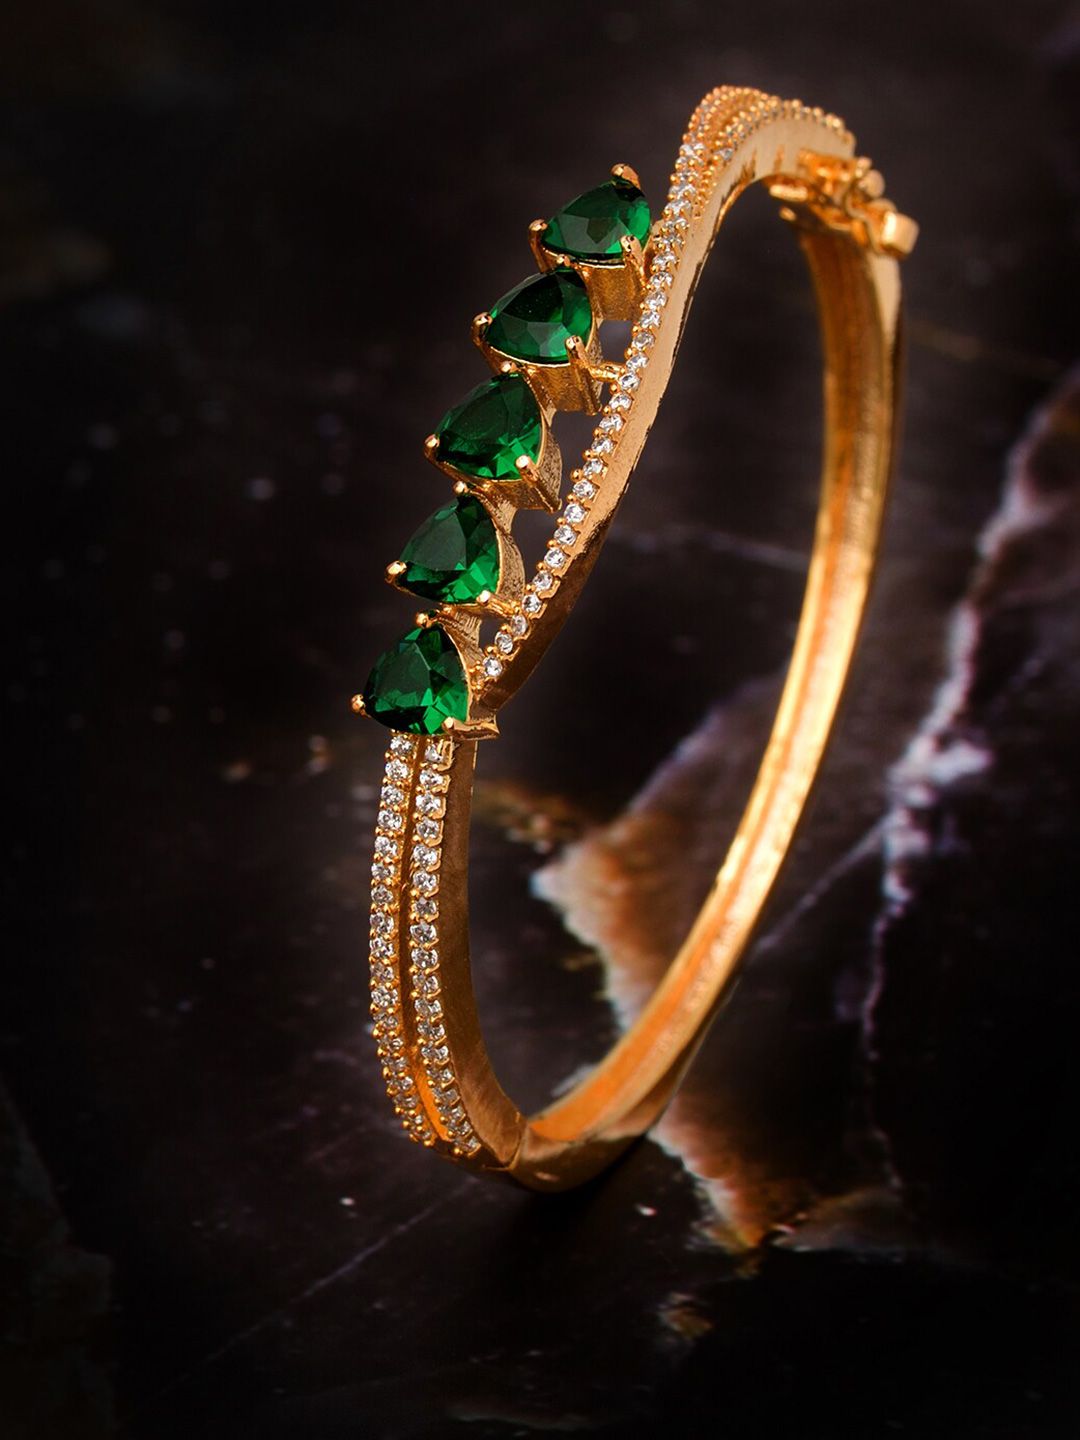 Saraf RS Jewellery Gold-Plated & Green Handcrafted Bangle-Style Bracelet Price in India